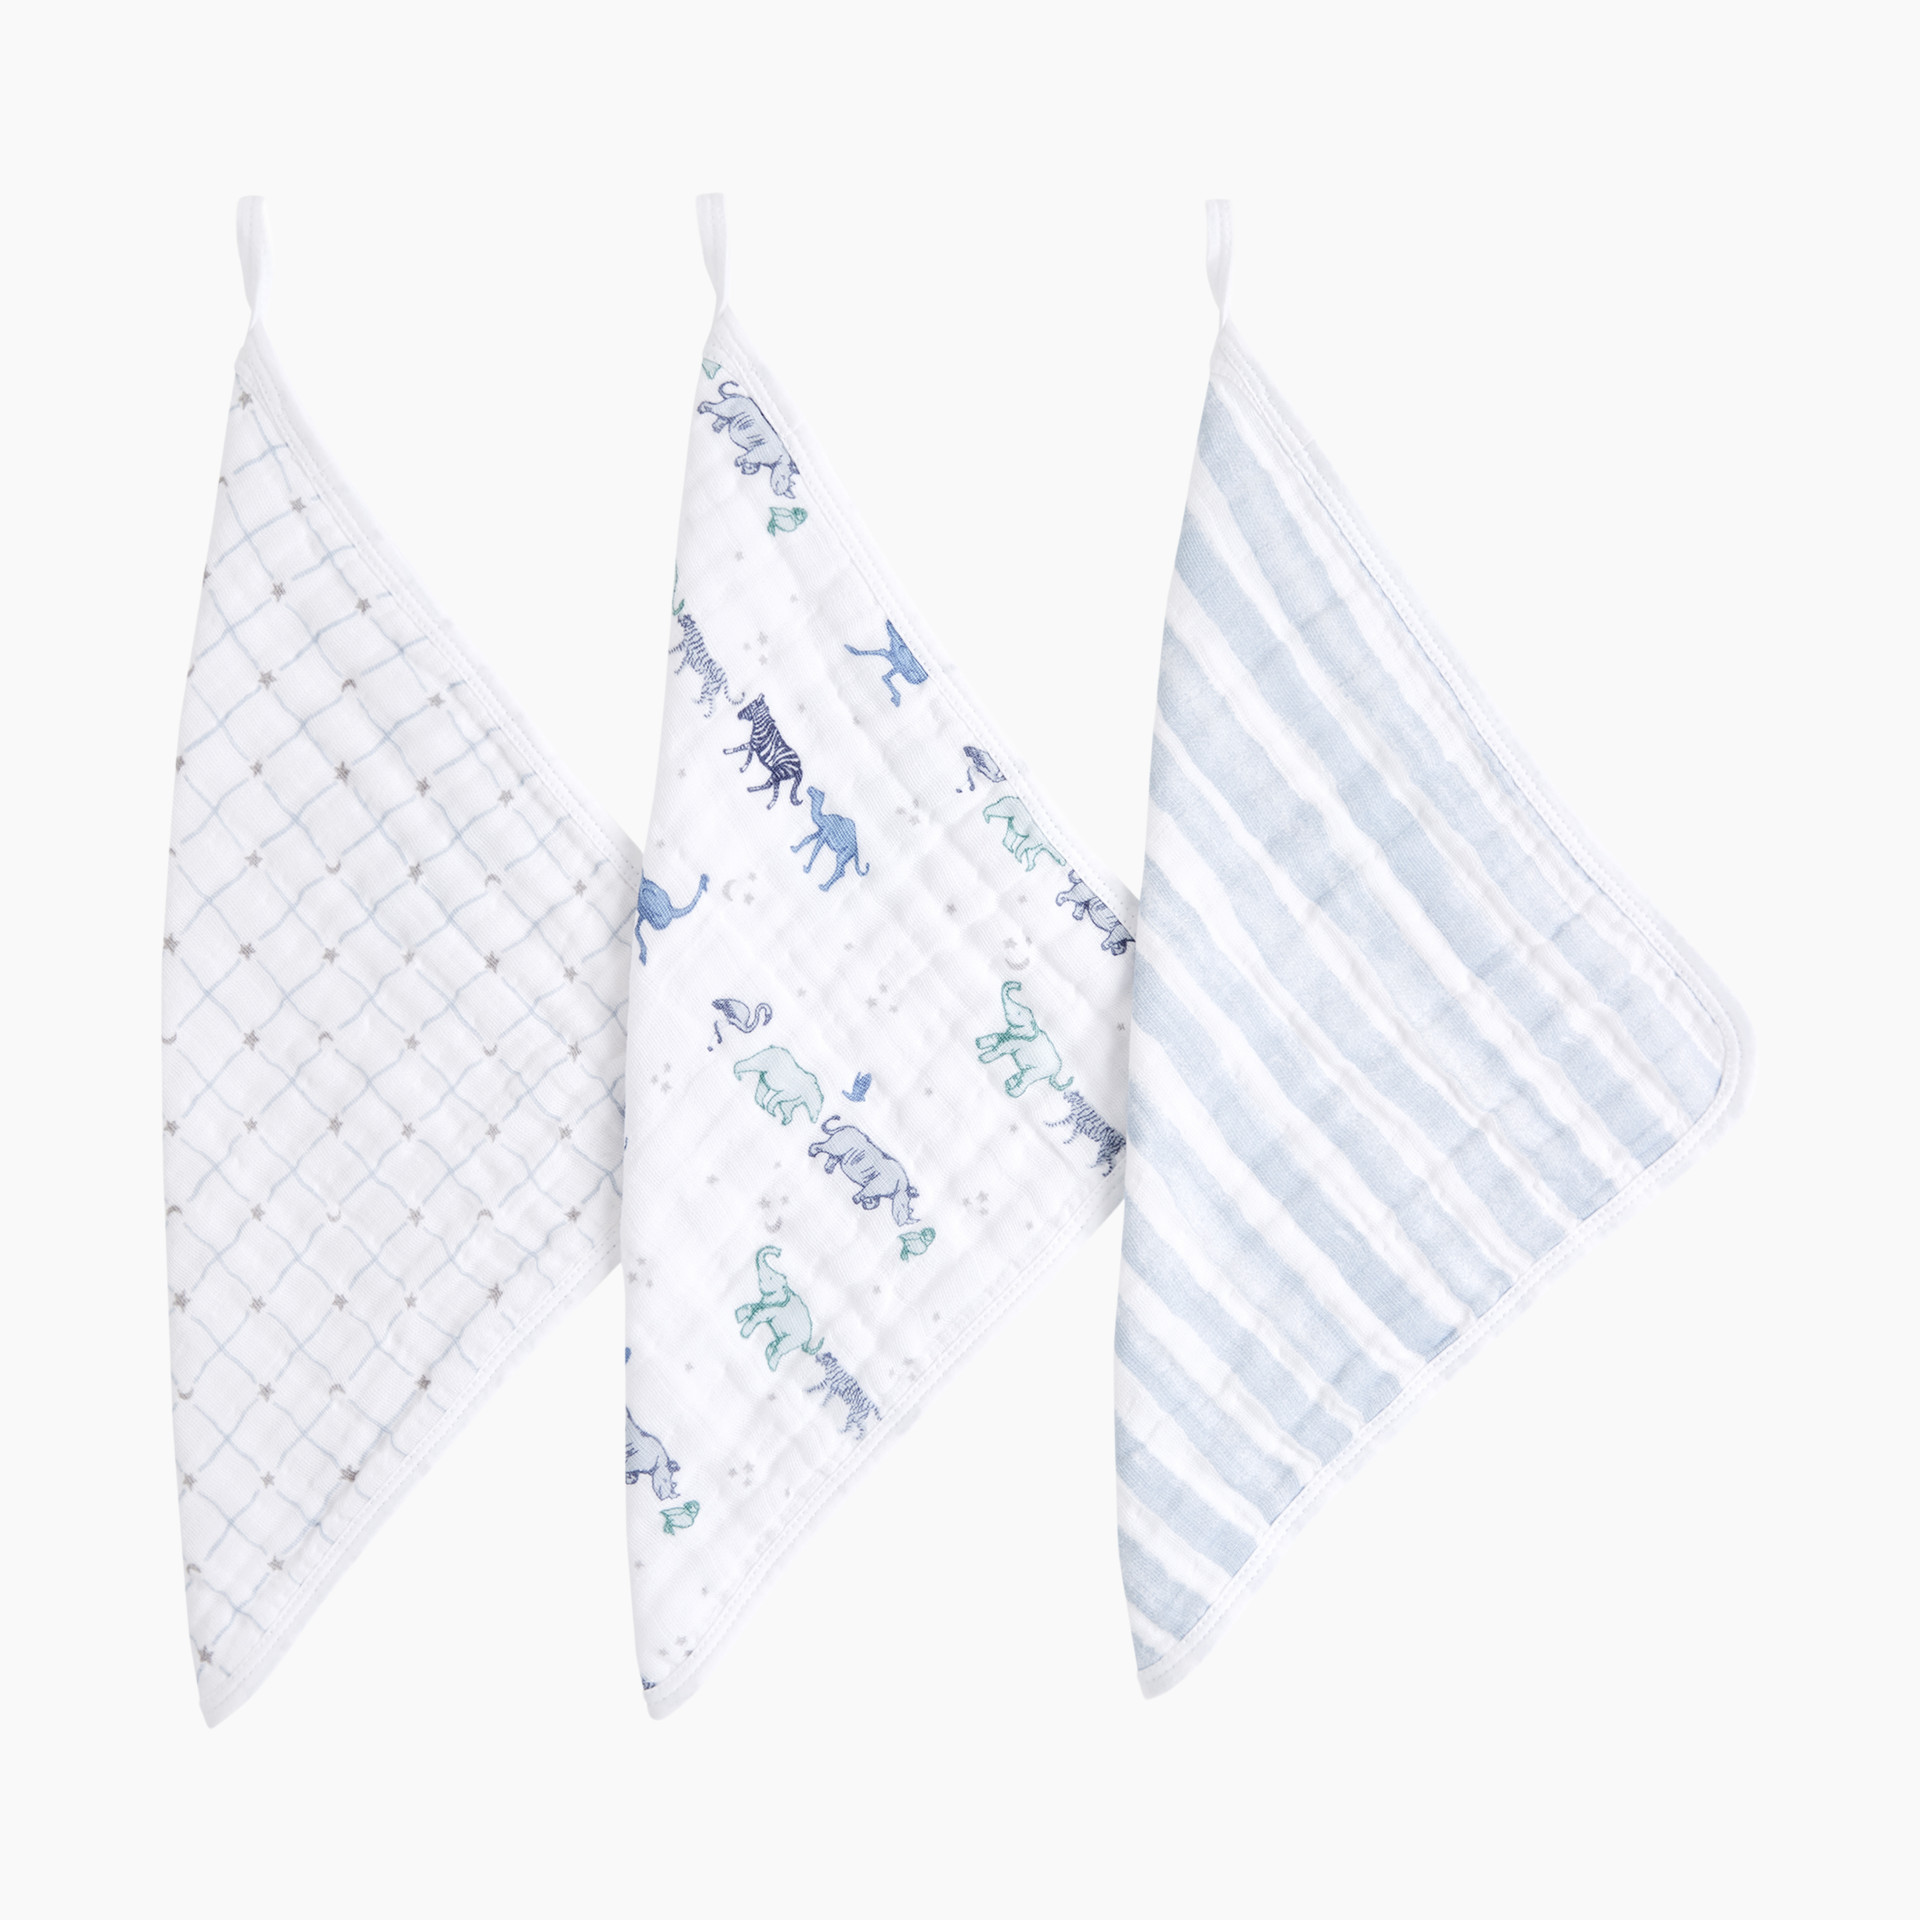 Aden + Anais Cotton Muslin Squares (3 Pack) in Keep Rising